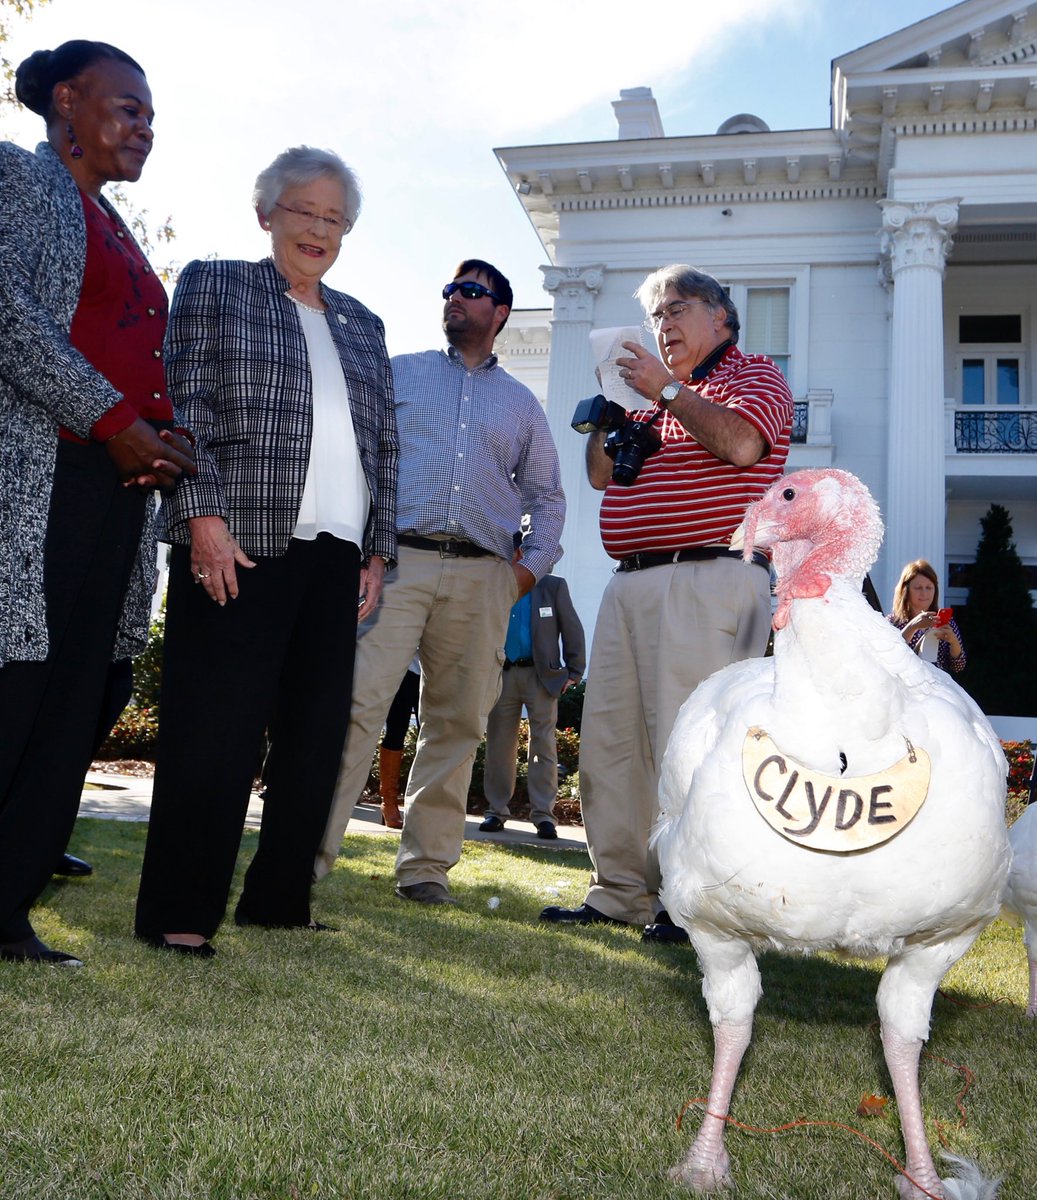 Gov. Kay Ivey pardons 2 turkeys from becoming Thanksgiving meals